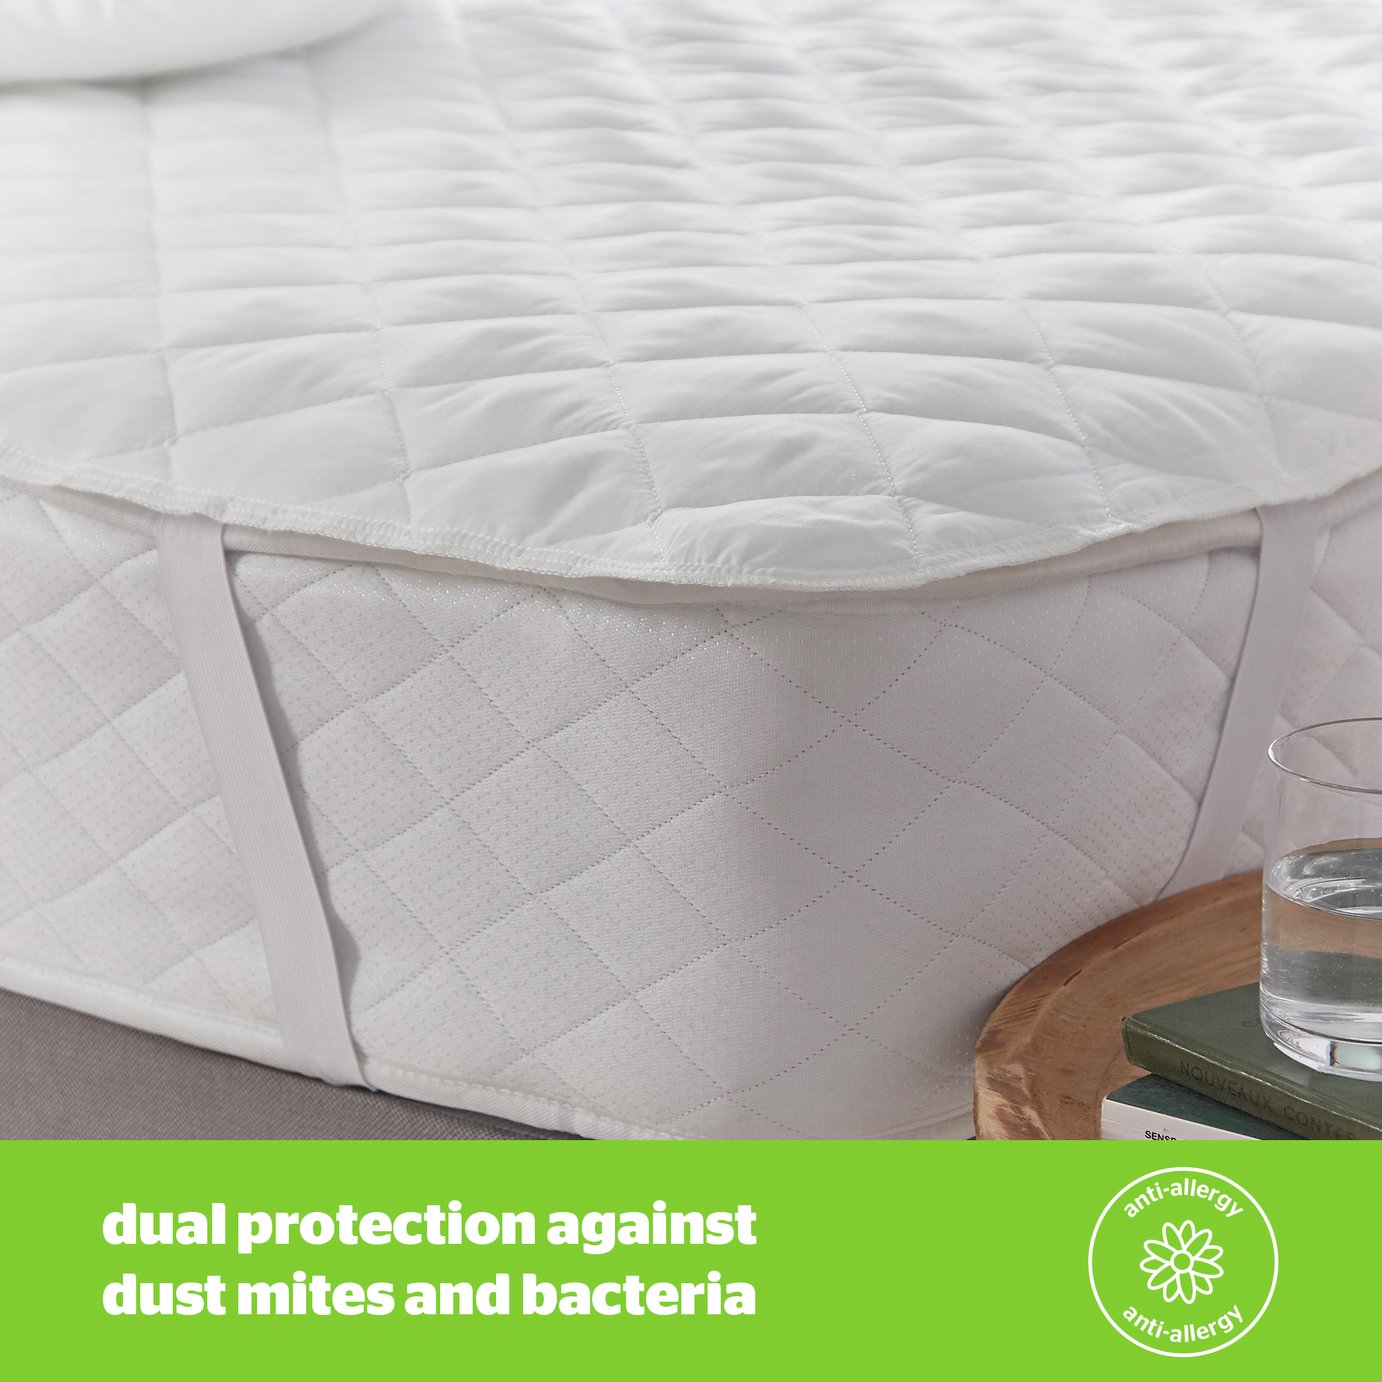 SLUMBERFLEECE QUILTED ANTI ALLERGY/BACTERIAL MATTRESS PROTECTOR SUPER KING SIZE